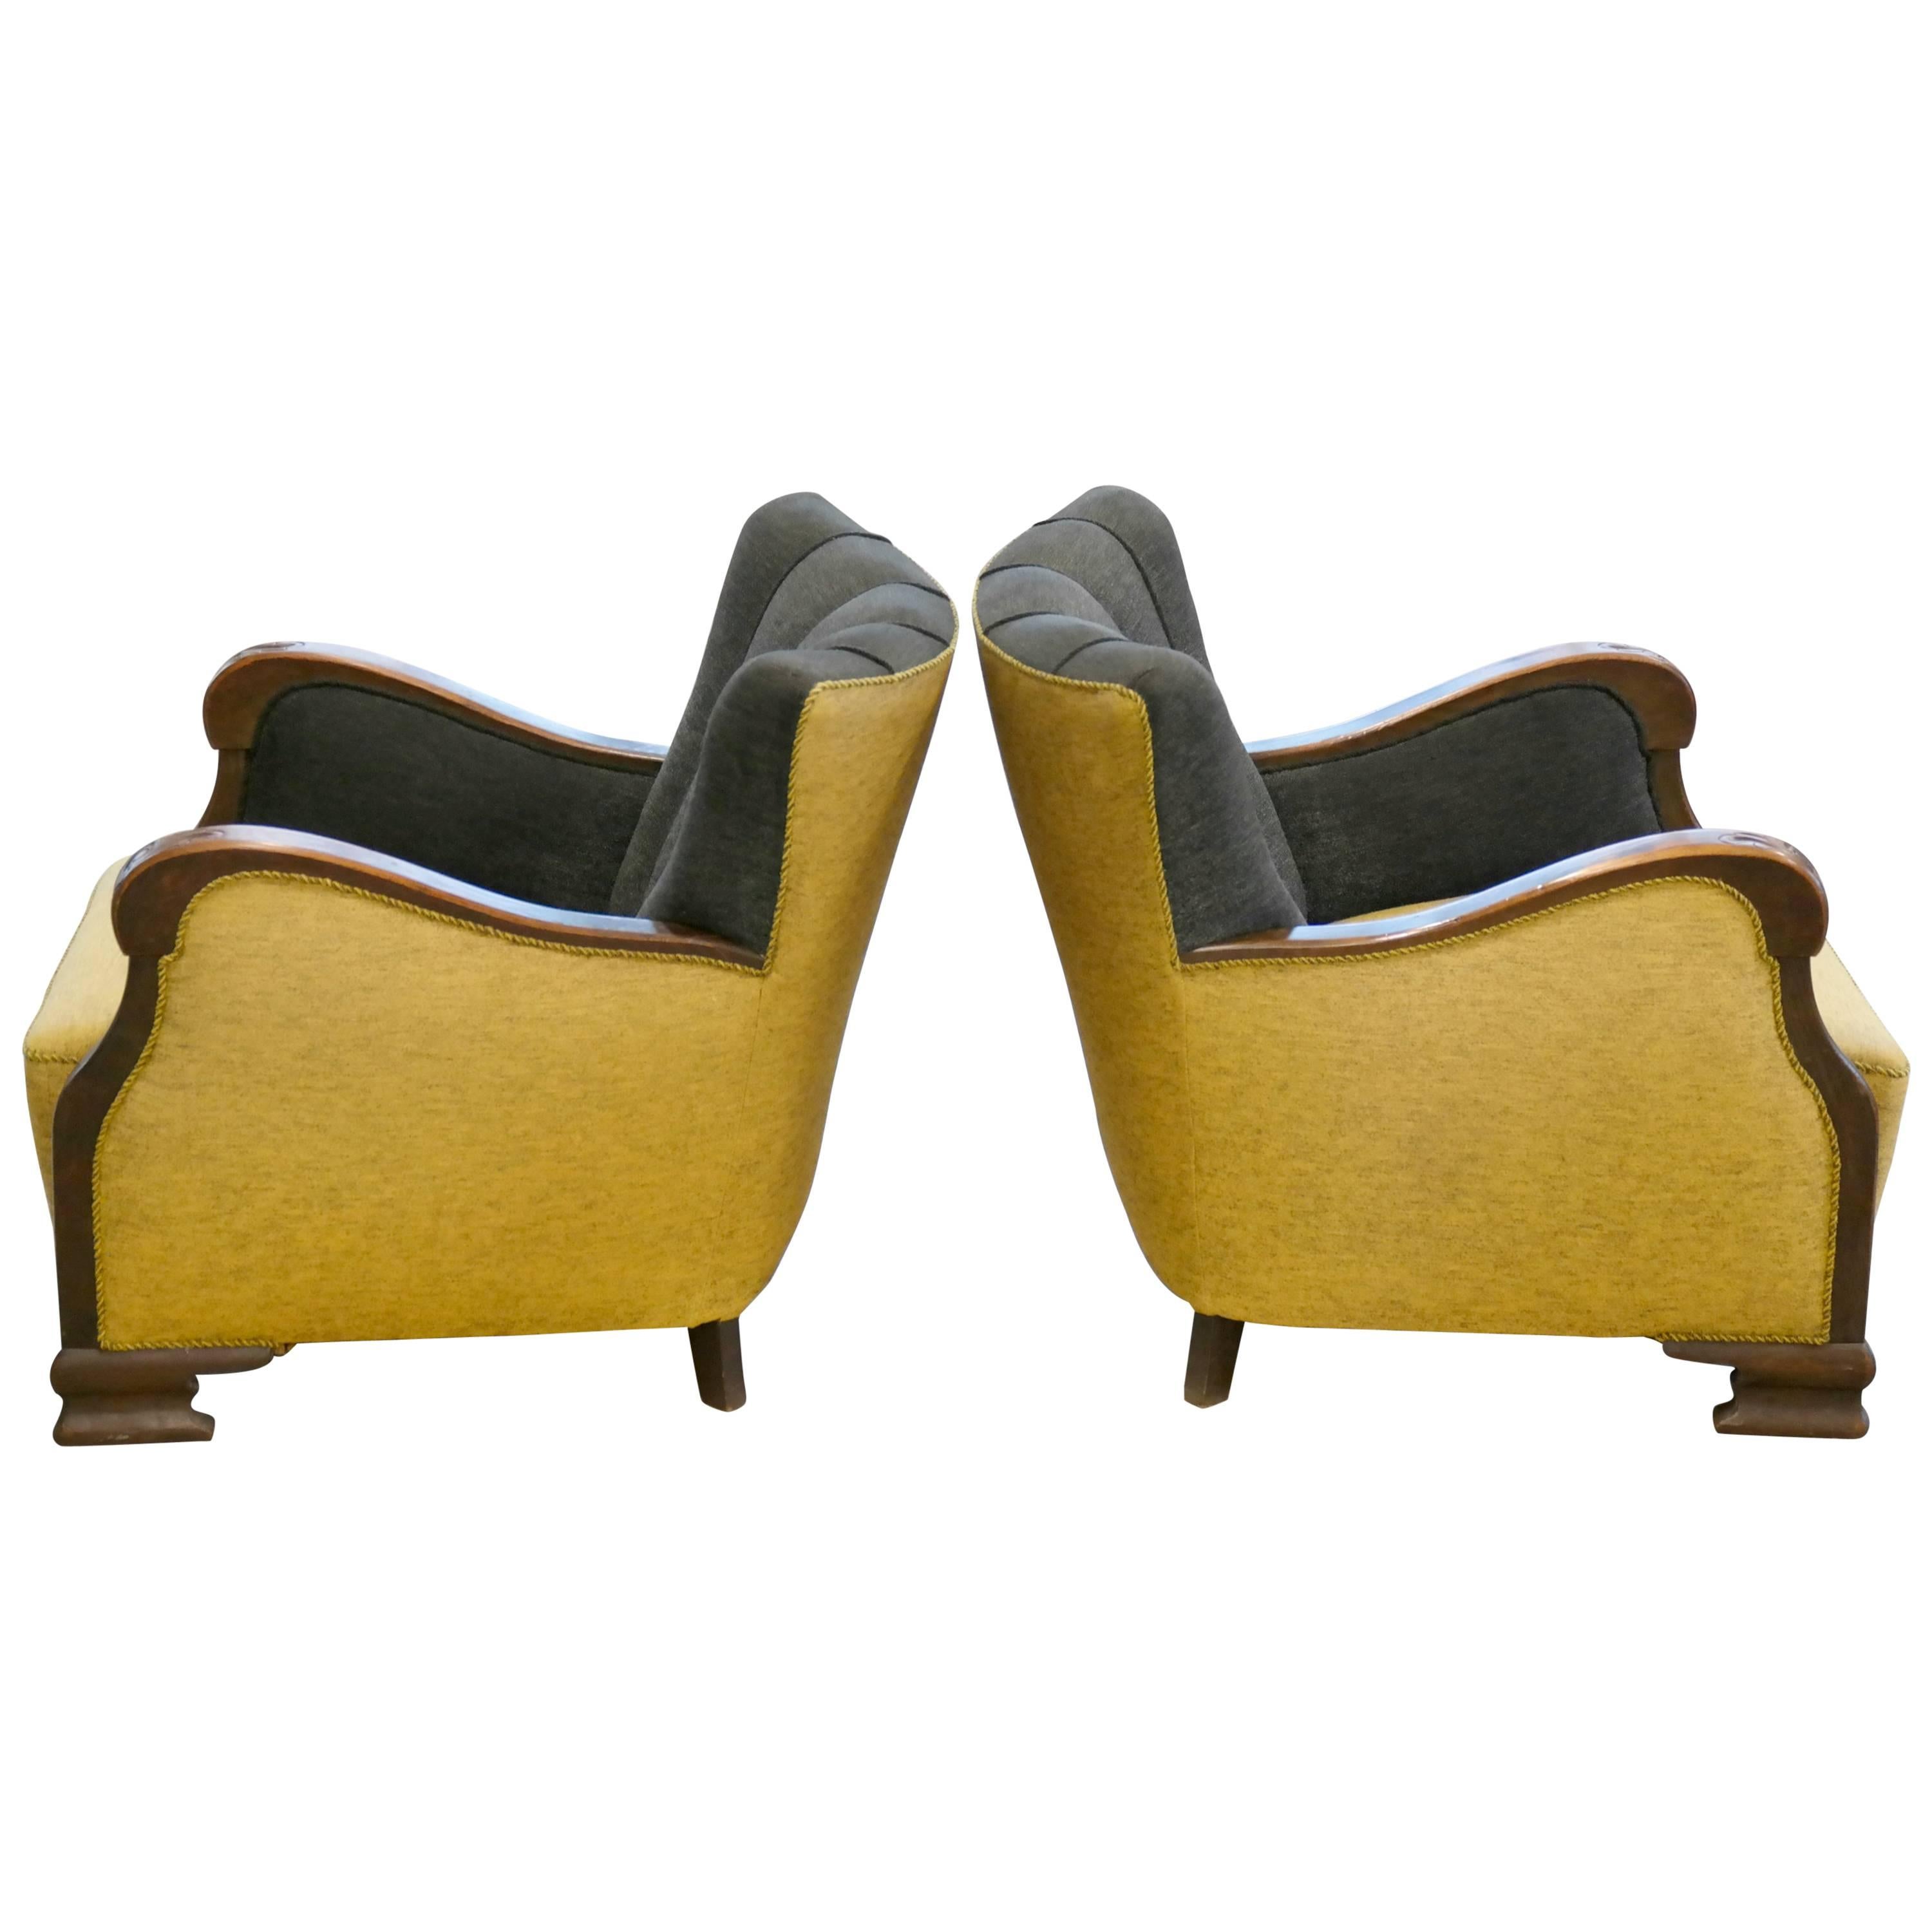 1930s Pair of Large-Sized Danish Club Chairs with Carved Armrests